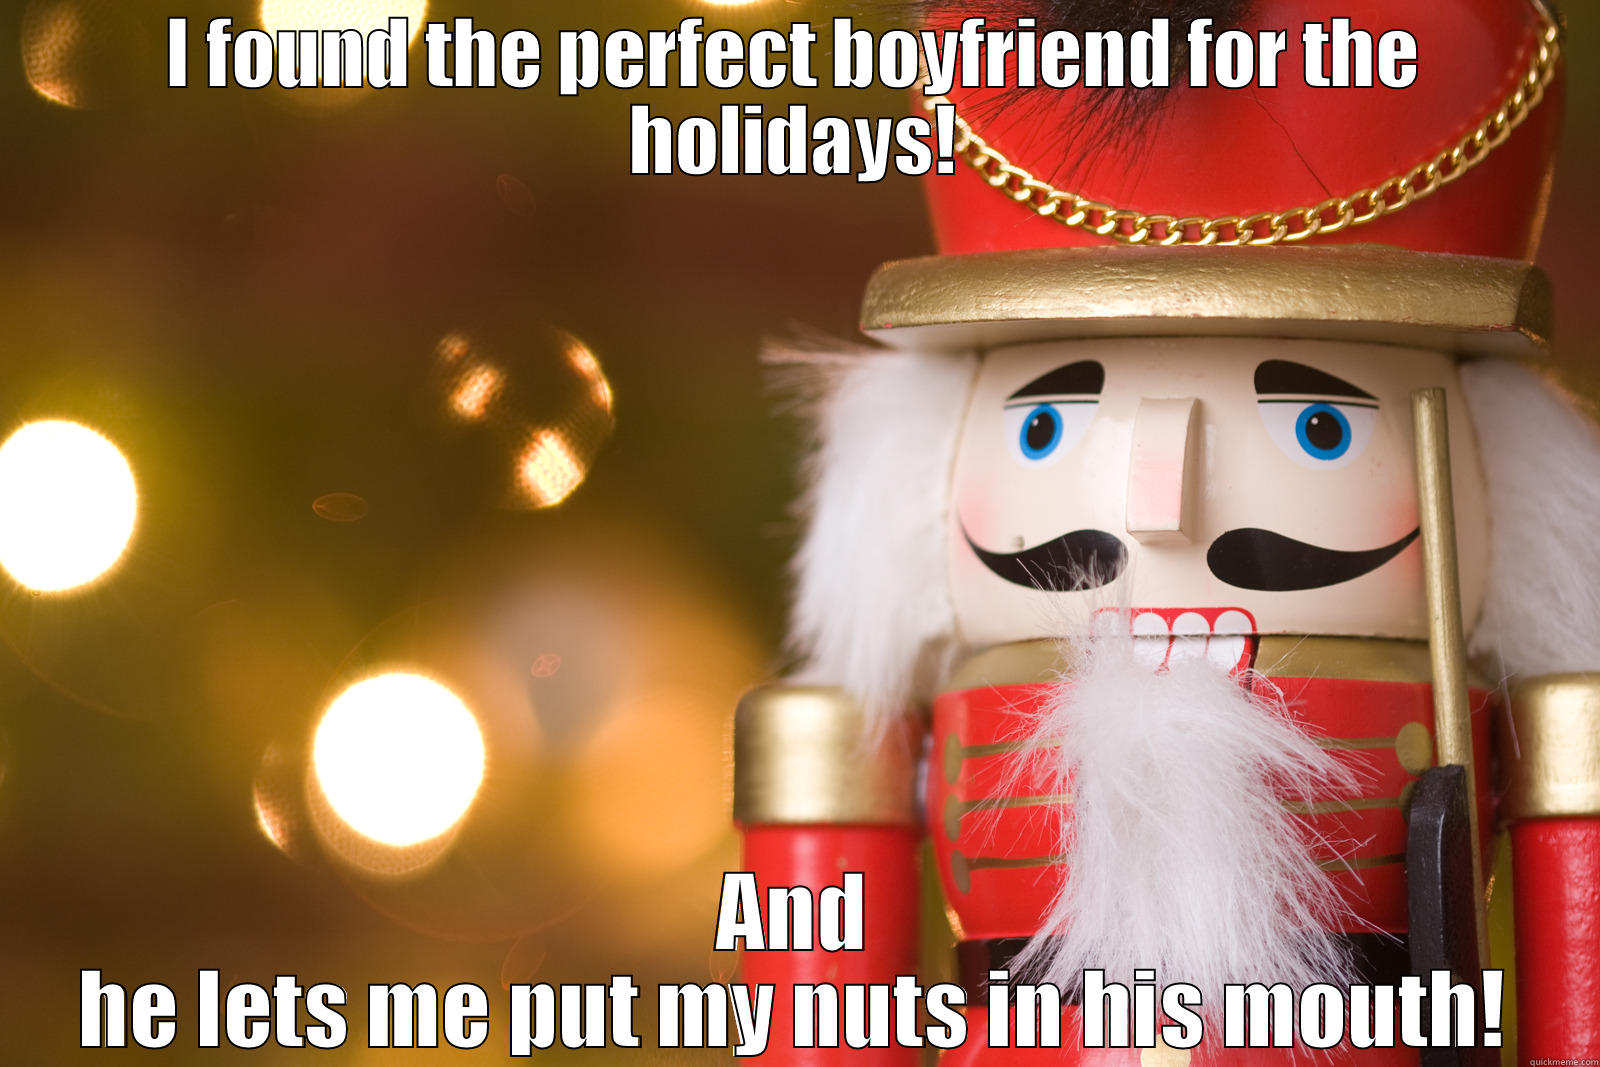 My New Boyfriend - I FOUND THE PERFECT BOYFRIEND FOR THE HOLIDAYS! AND HE LETS ME PUT MY NUTS IN HIS MOUTH! Misc